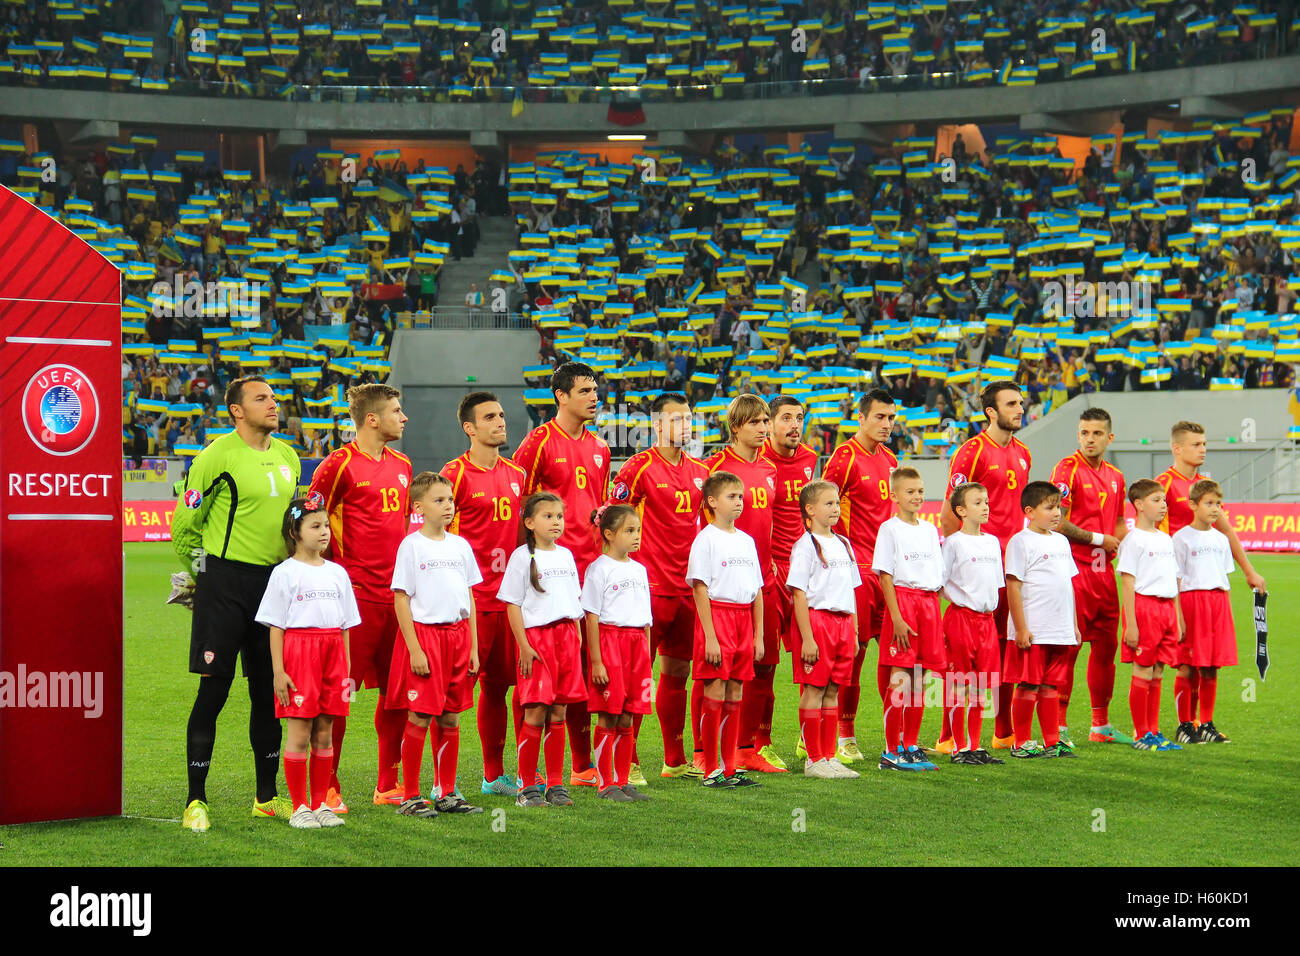 Players of FYR Macedonia national football team listen to the anthem before the UEFA EURO 2016 Qualifying game against Ukraine Stock Photo